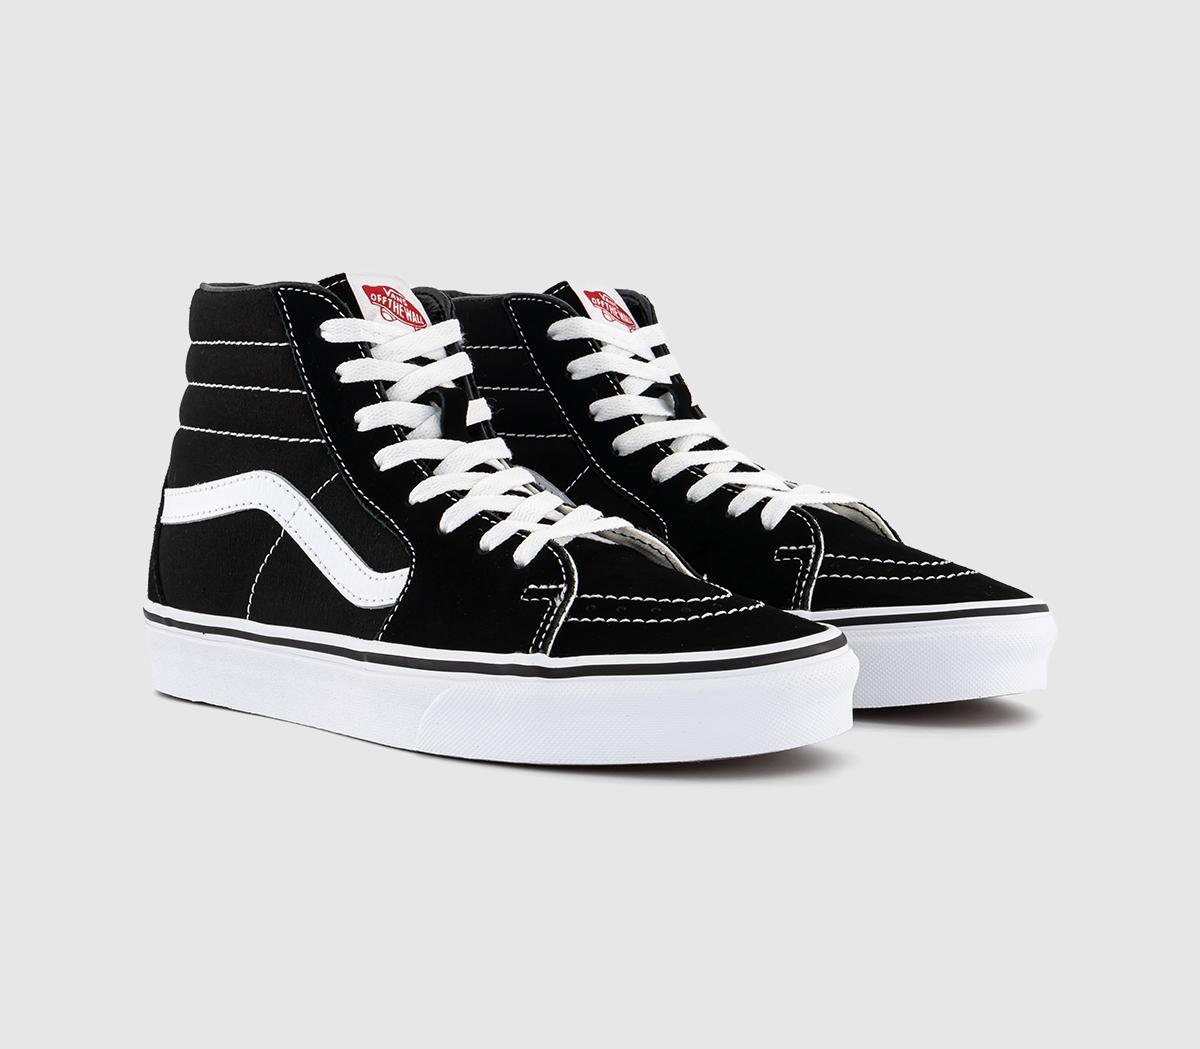 Vans Womens Sk8 Hi Canvas In Black And White, 8